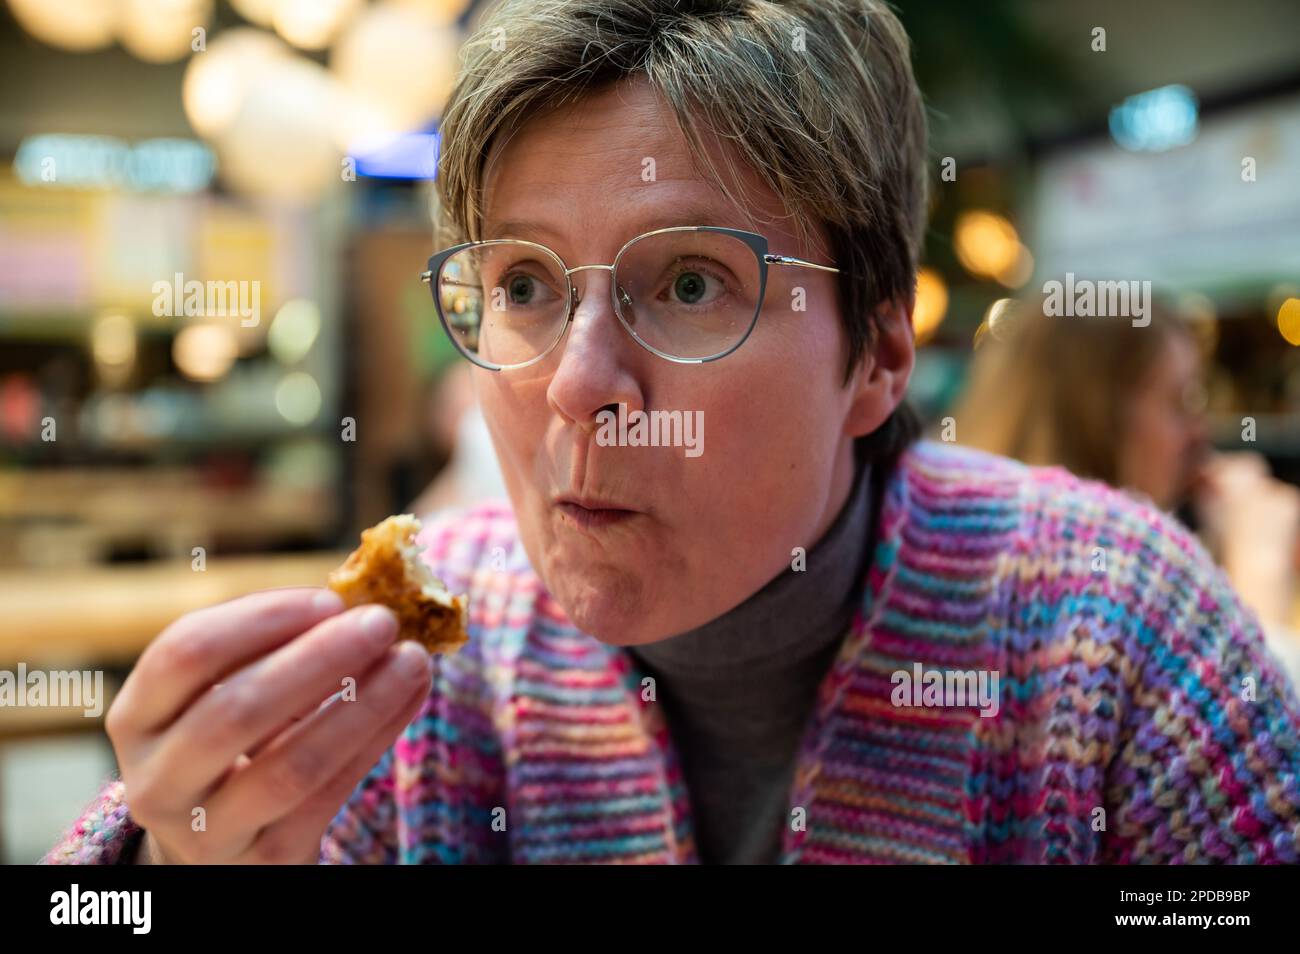 36 year old white woman eating indoors, Brussels, Belgium Stock Photo